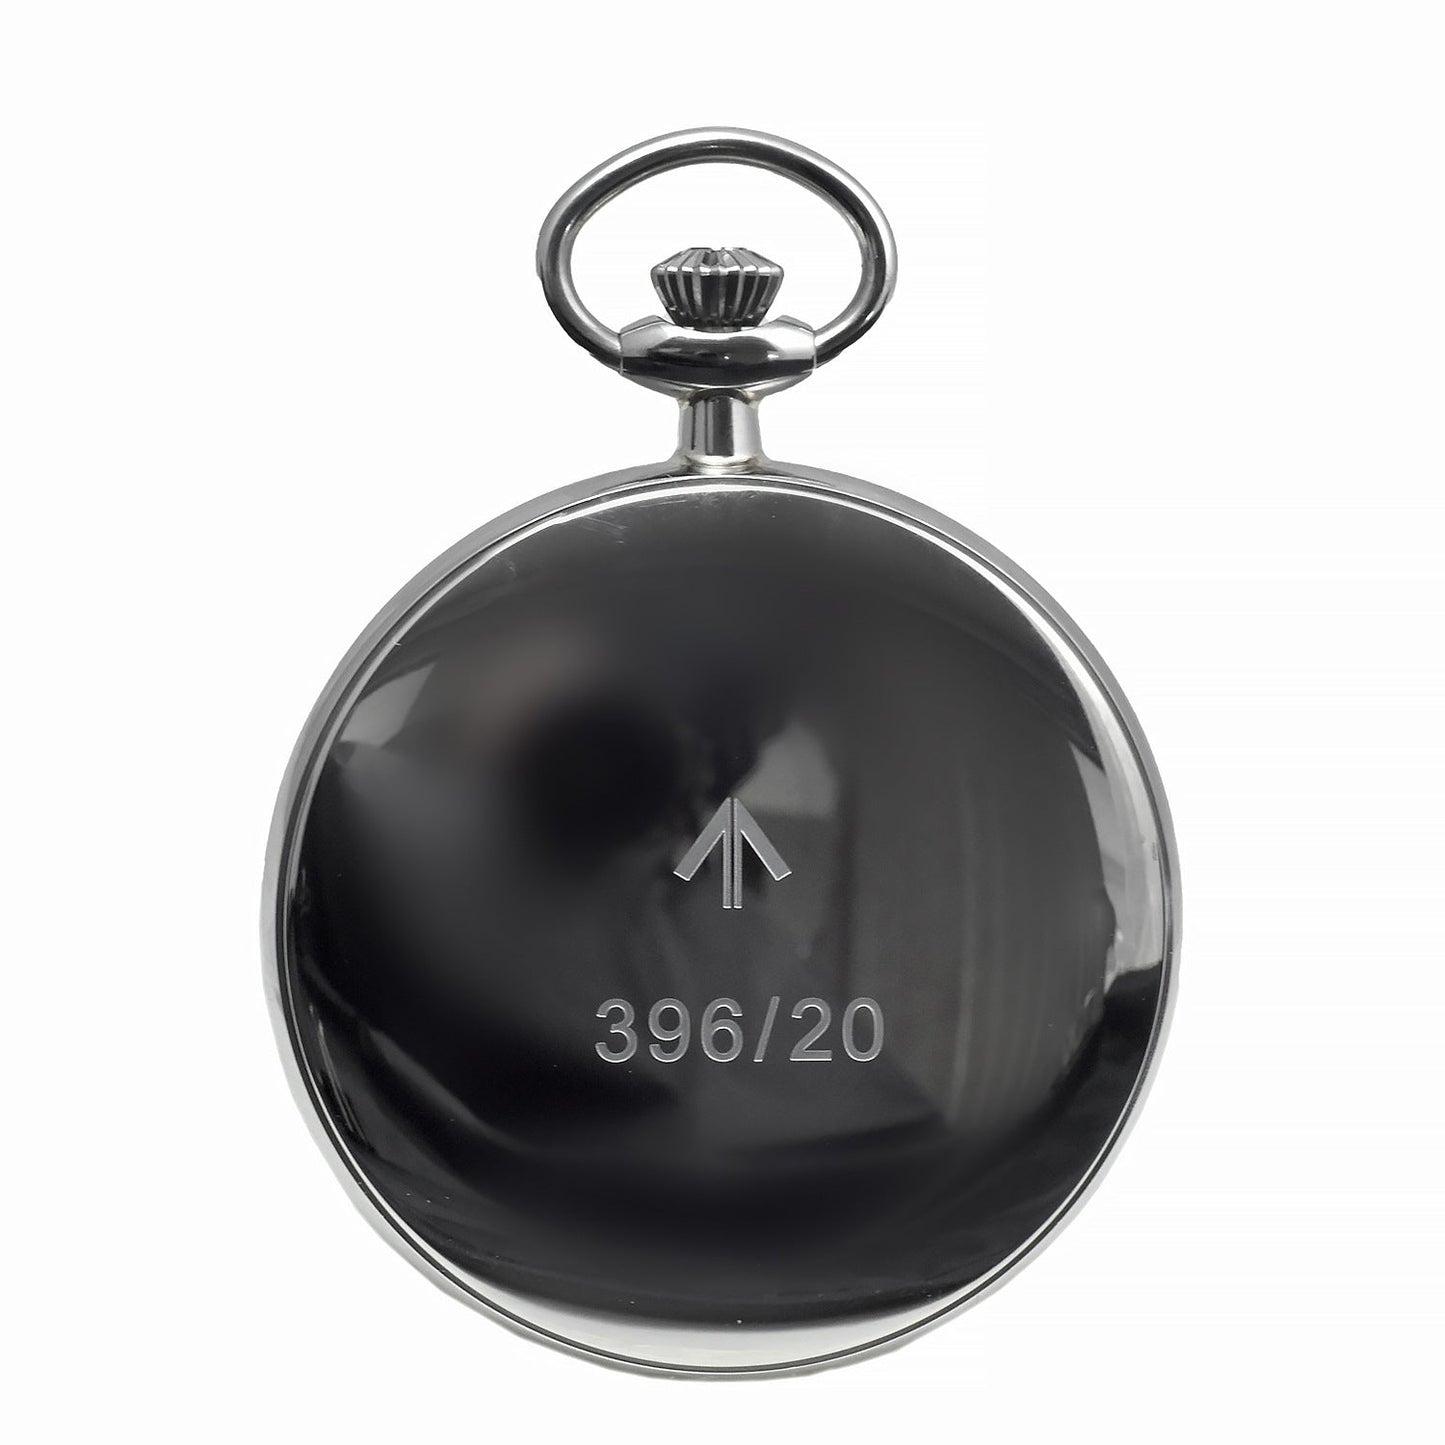 General Service Military Pocket Watch (24 Jewel Automatic Movement with Option to Hand Wind)